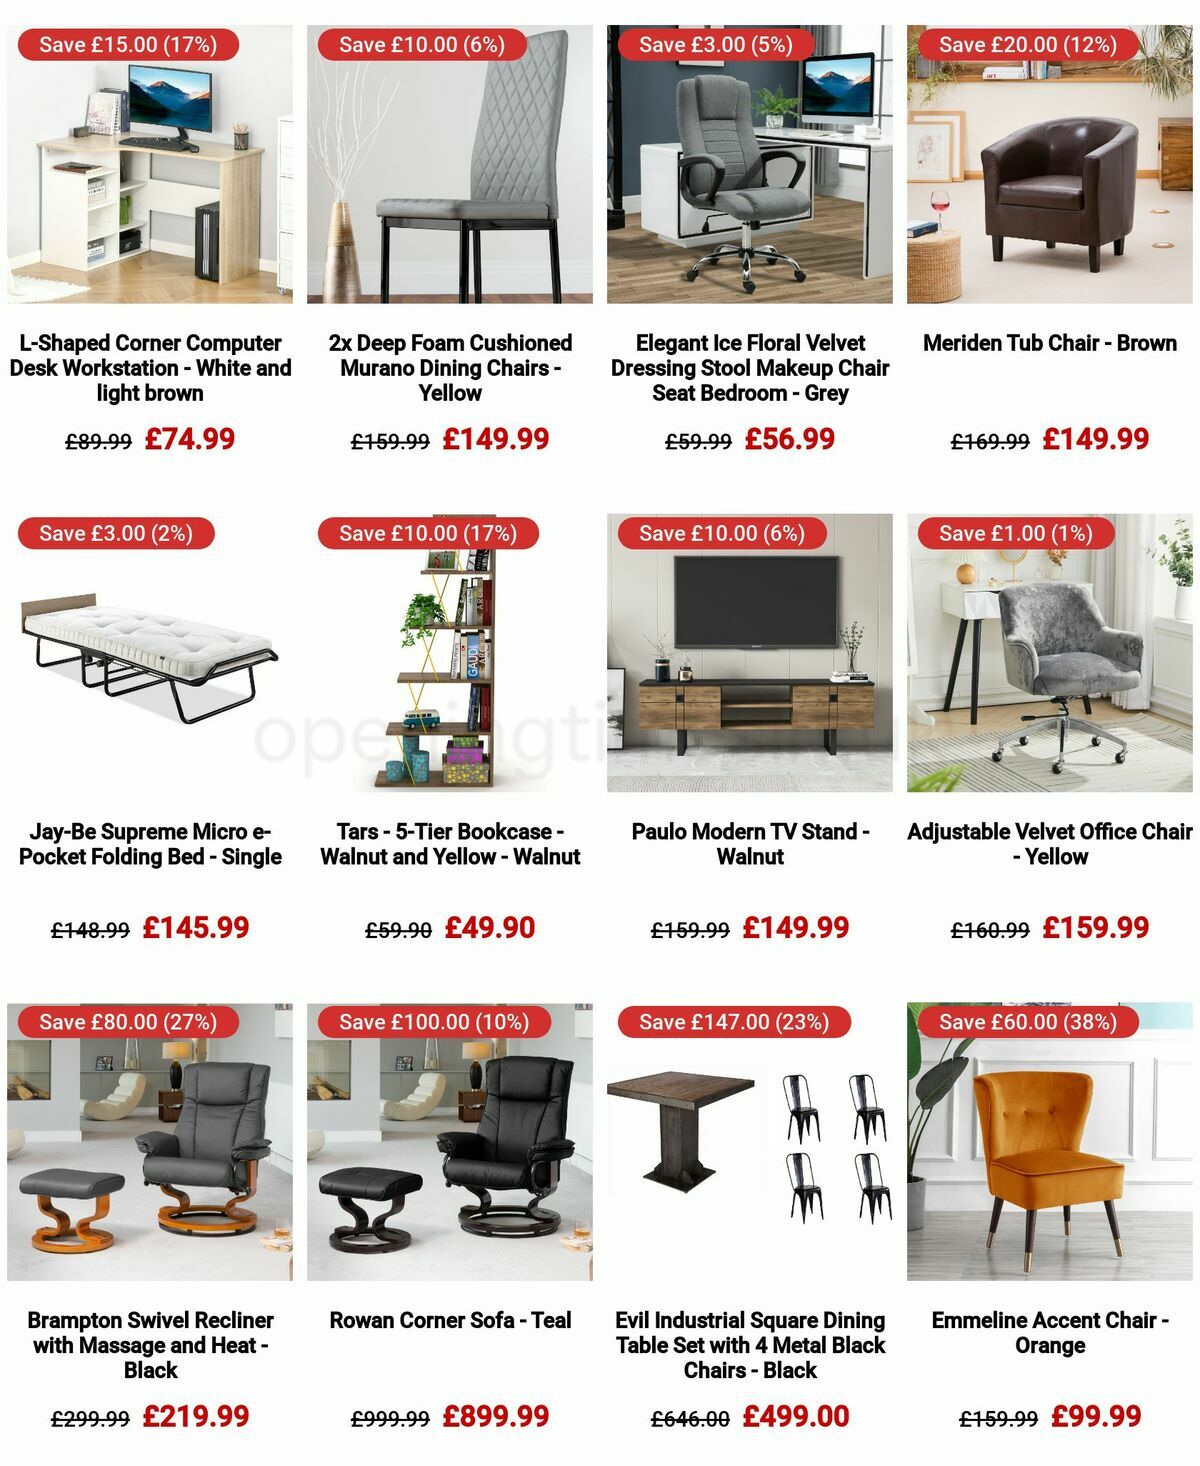 The Range Furniture Offers Offers from 20 April